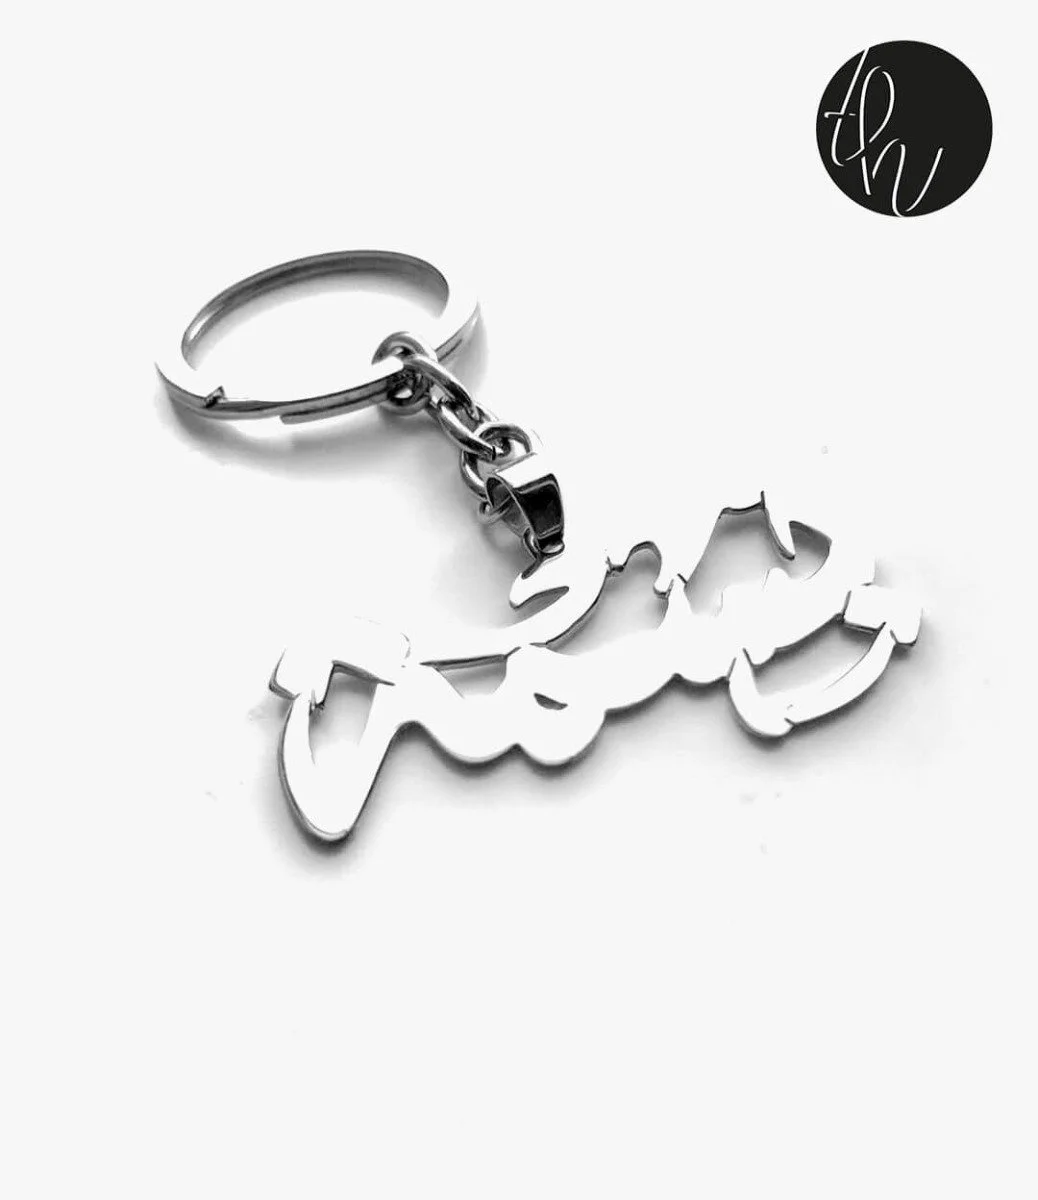 Silver Customized Name Keychain